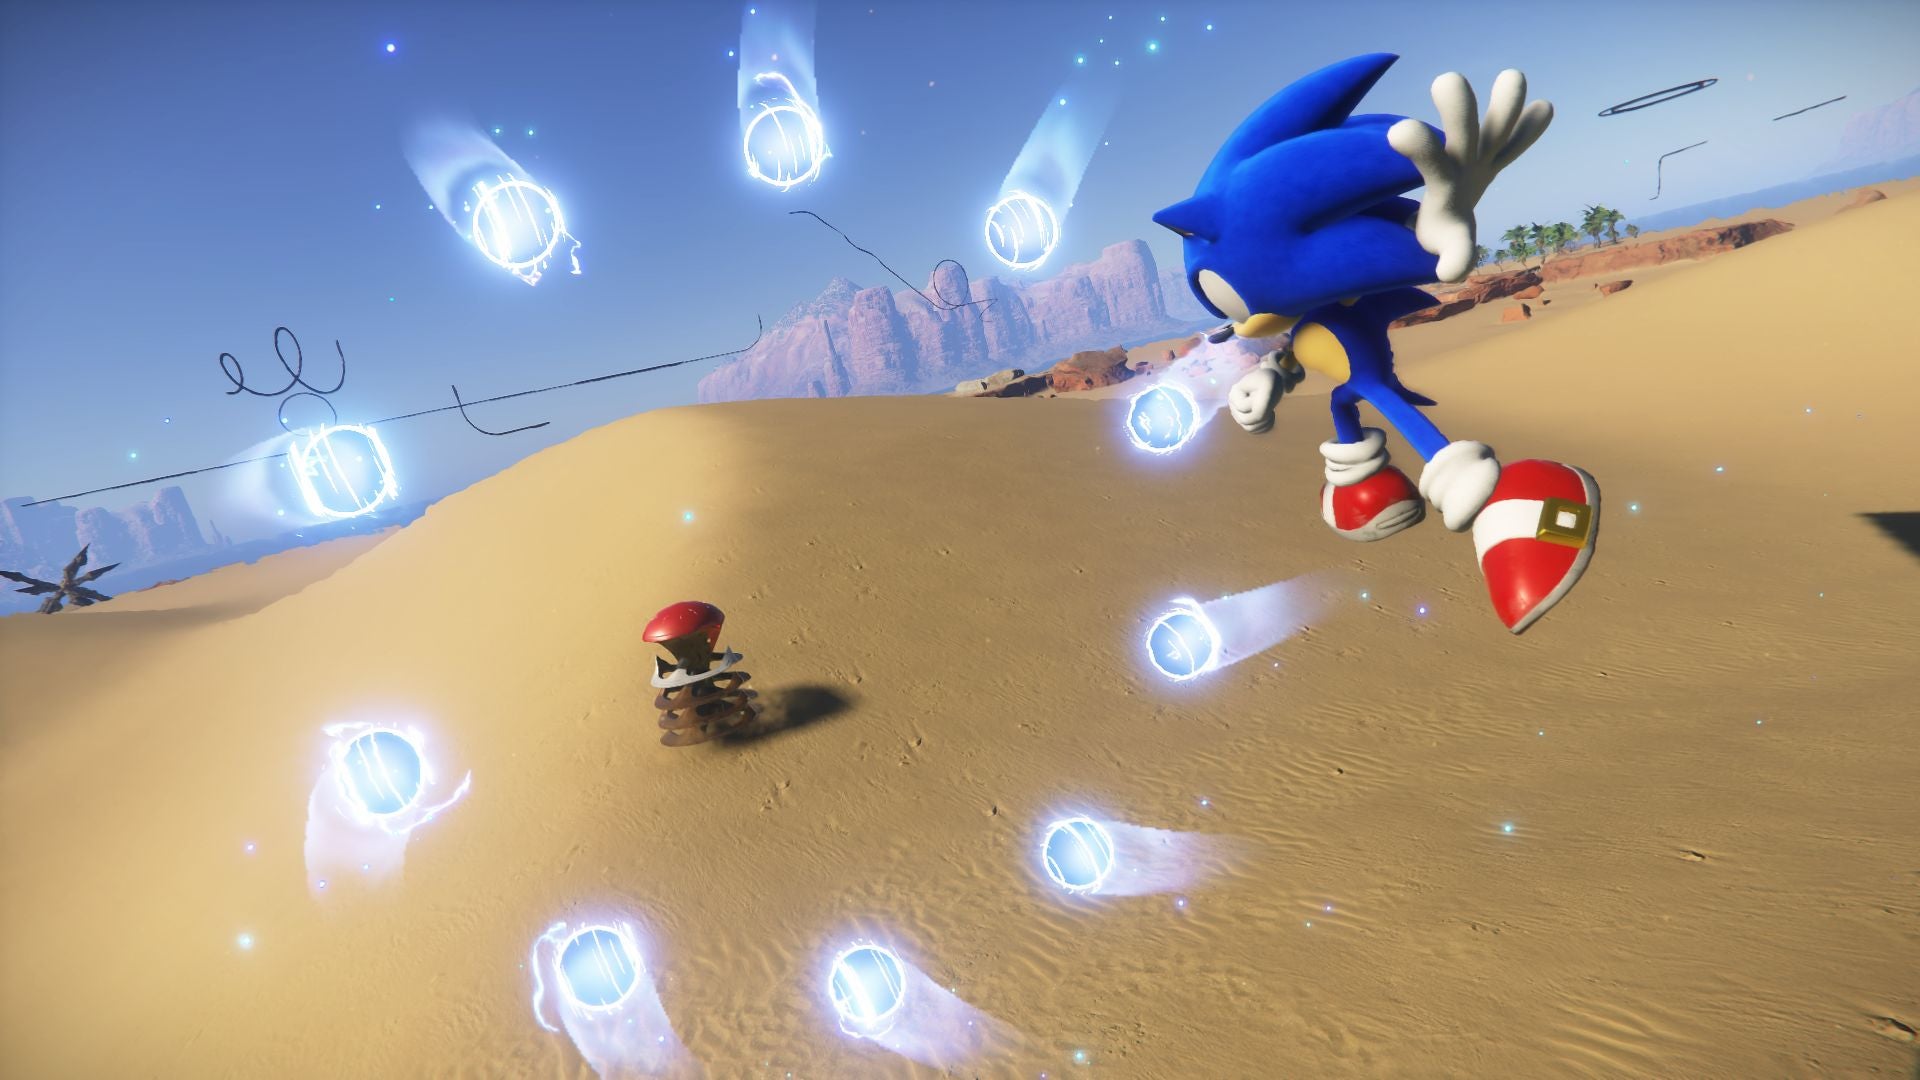 Sonic Frontiers preview - Sonic doing a jumping attack against an enemy in the desert